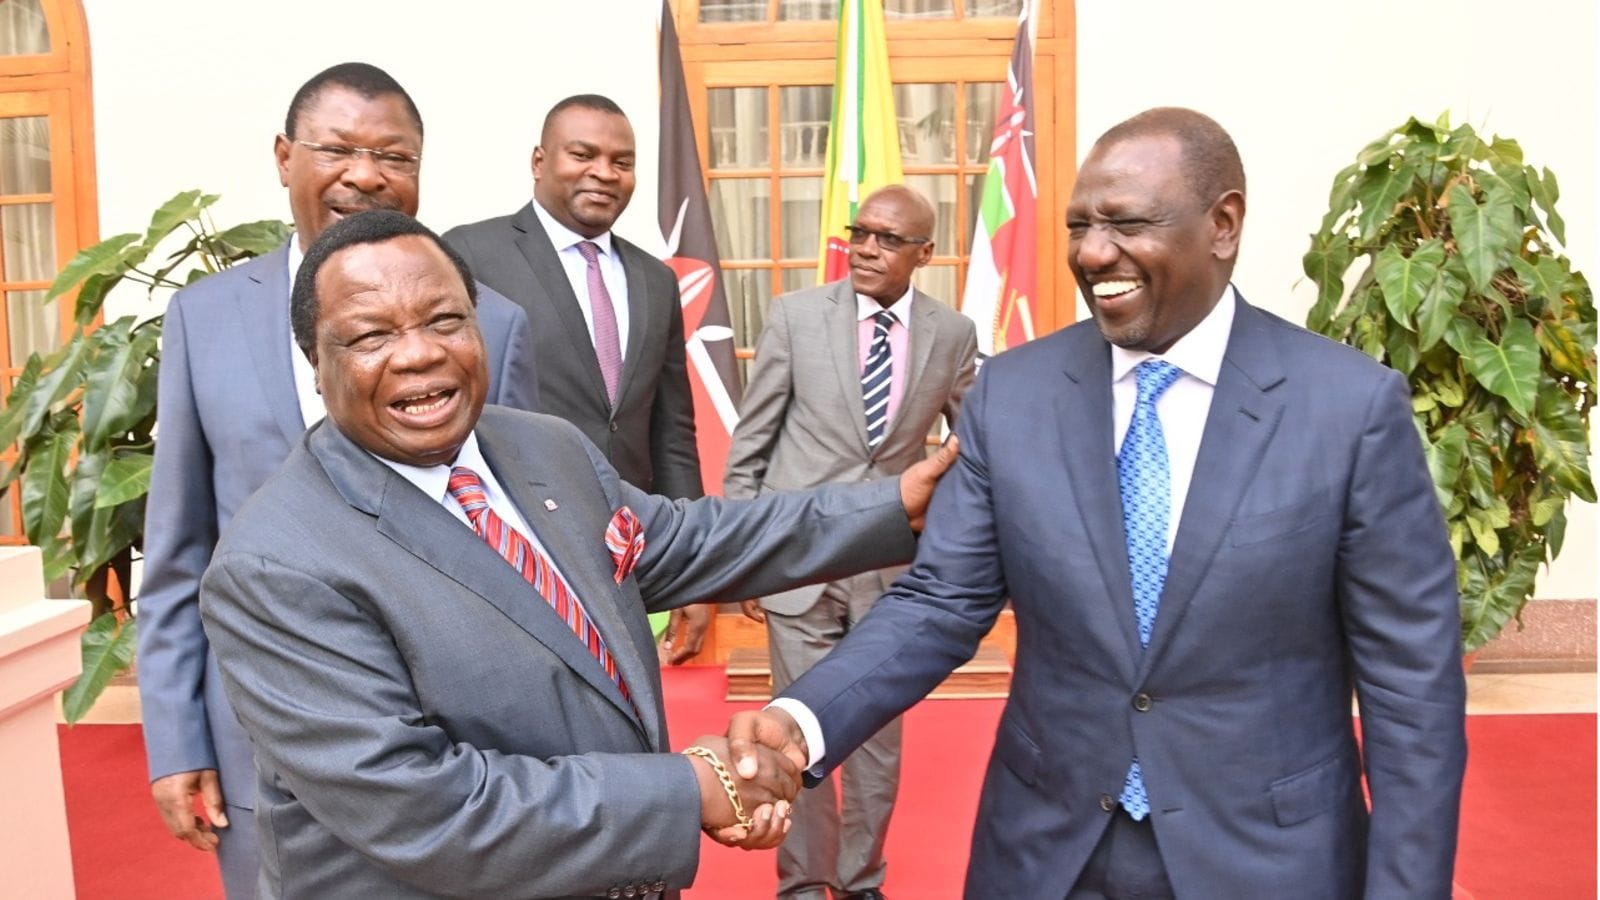 File image of Francis Atwoli and President William Ruto.